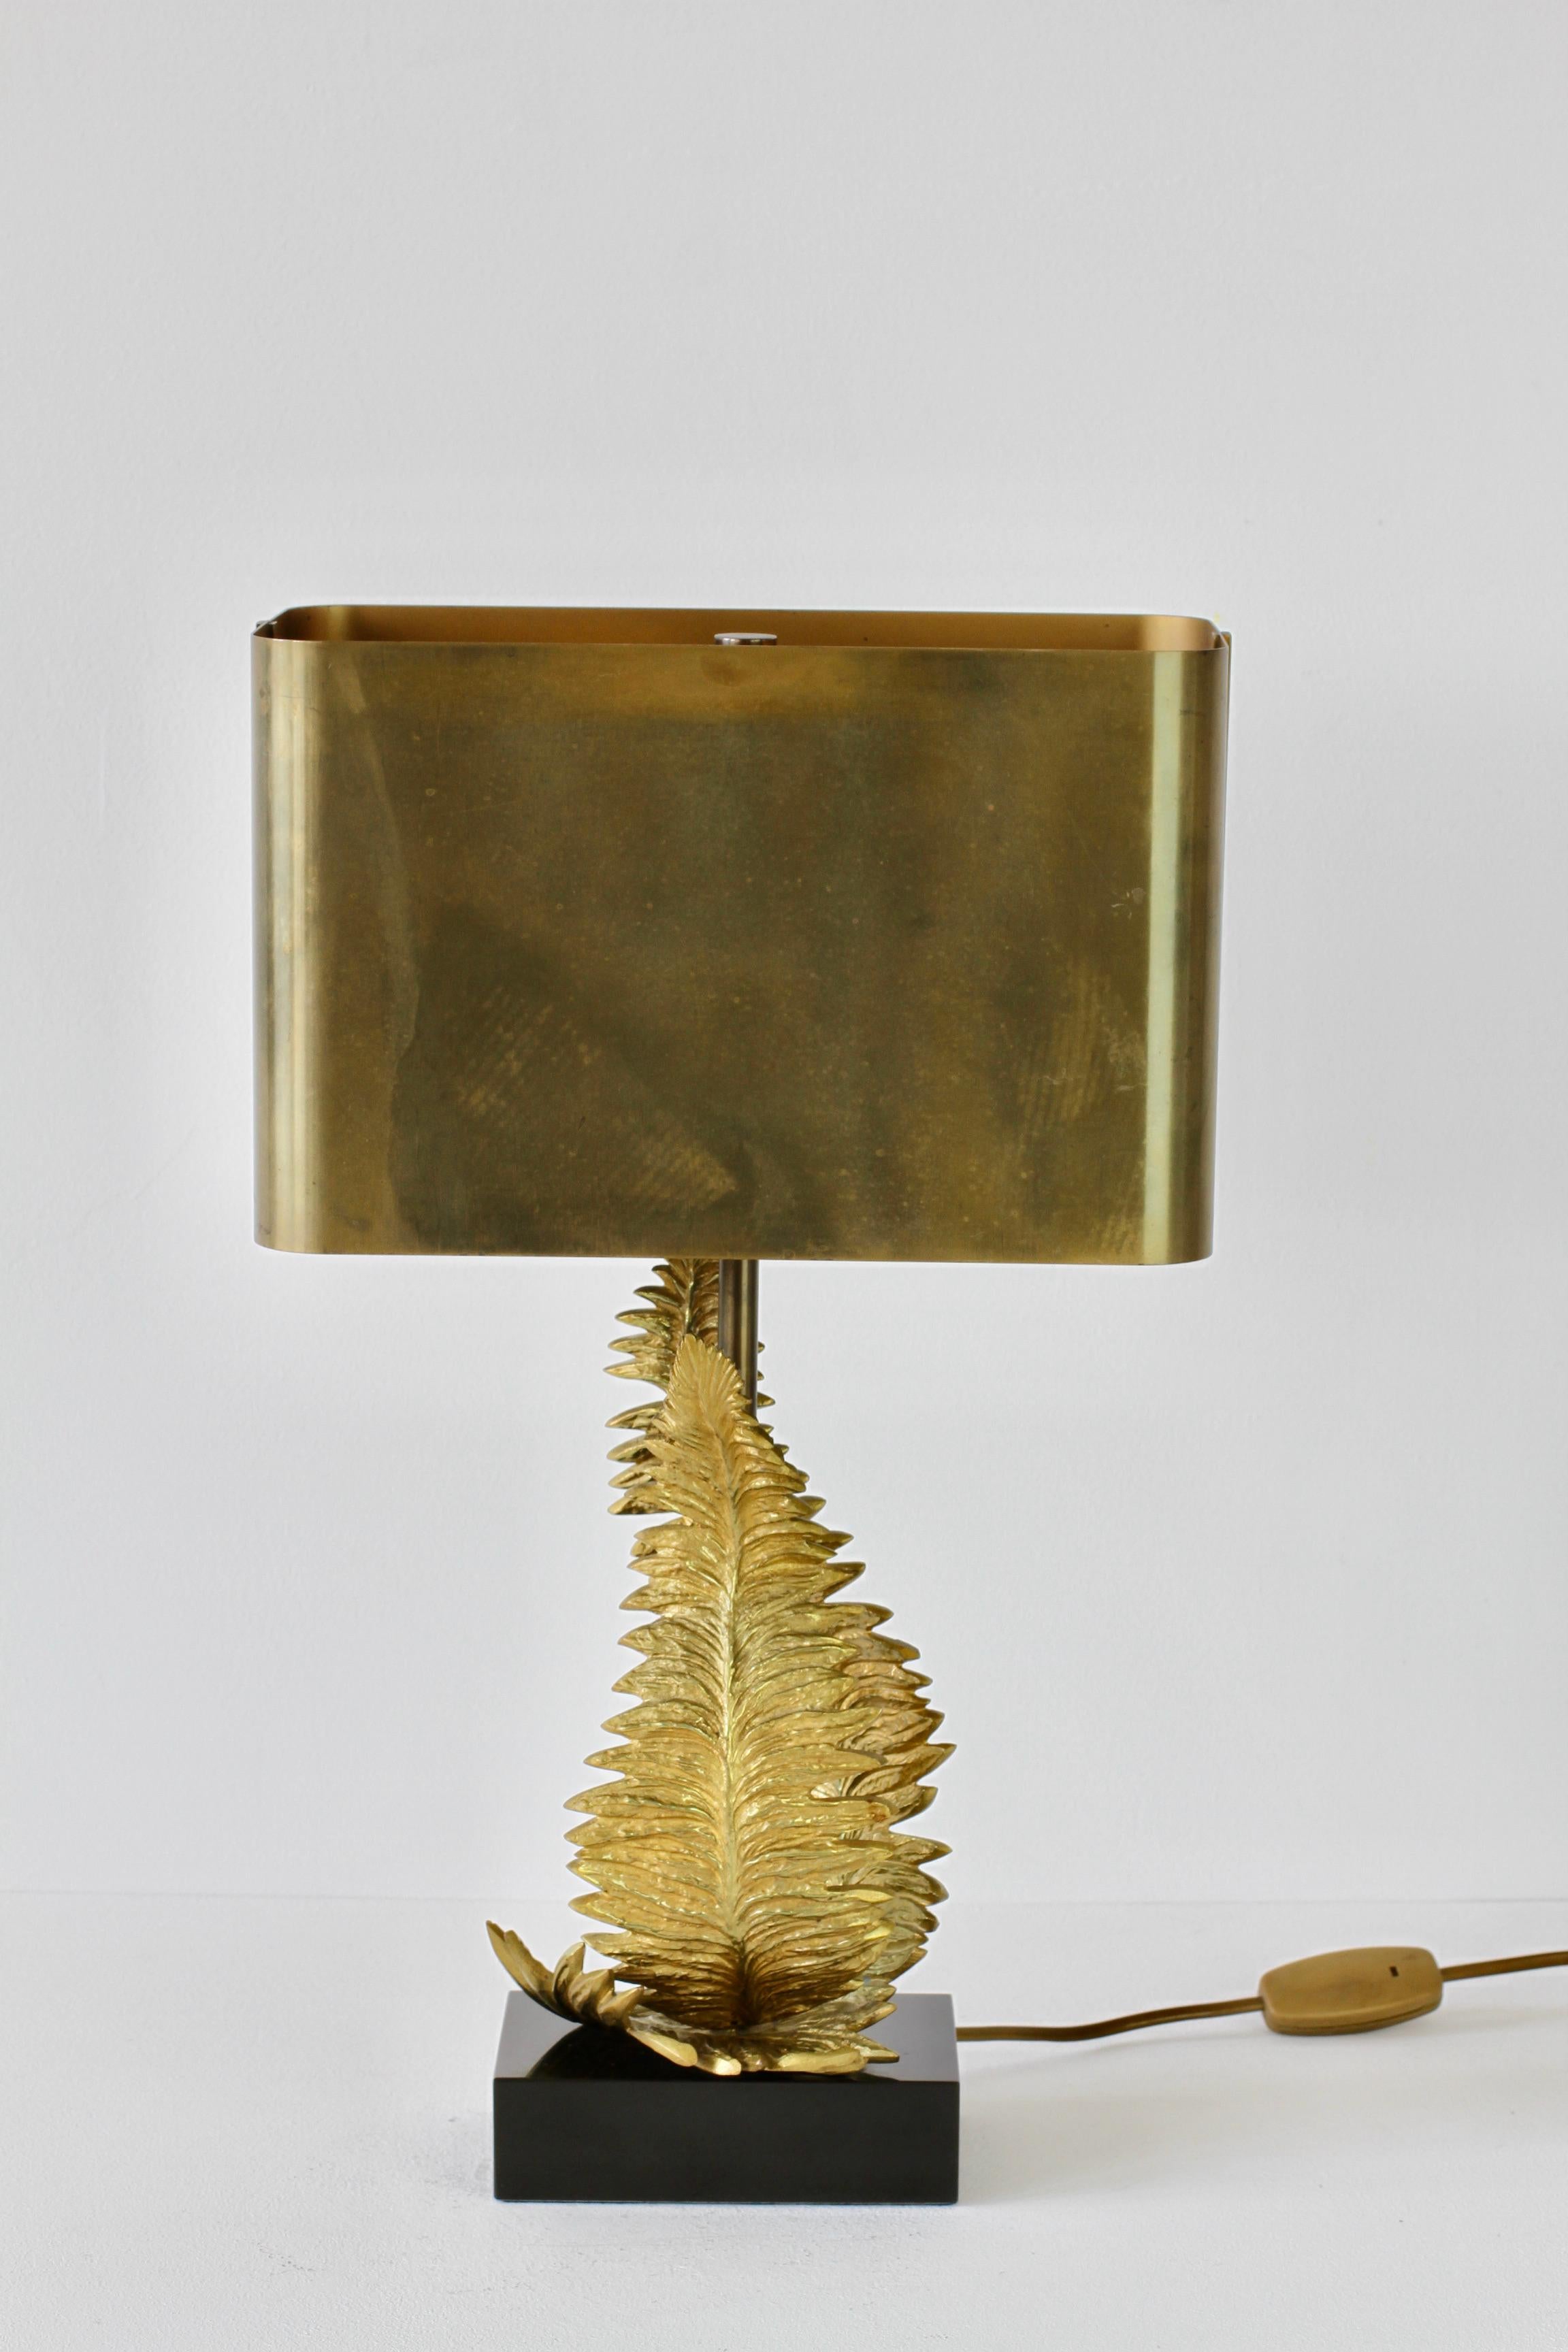 Cast Chrystiane Charles for Maison Charles Signed Brass Fern Table Lamp circa 1960s For Sale